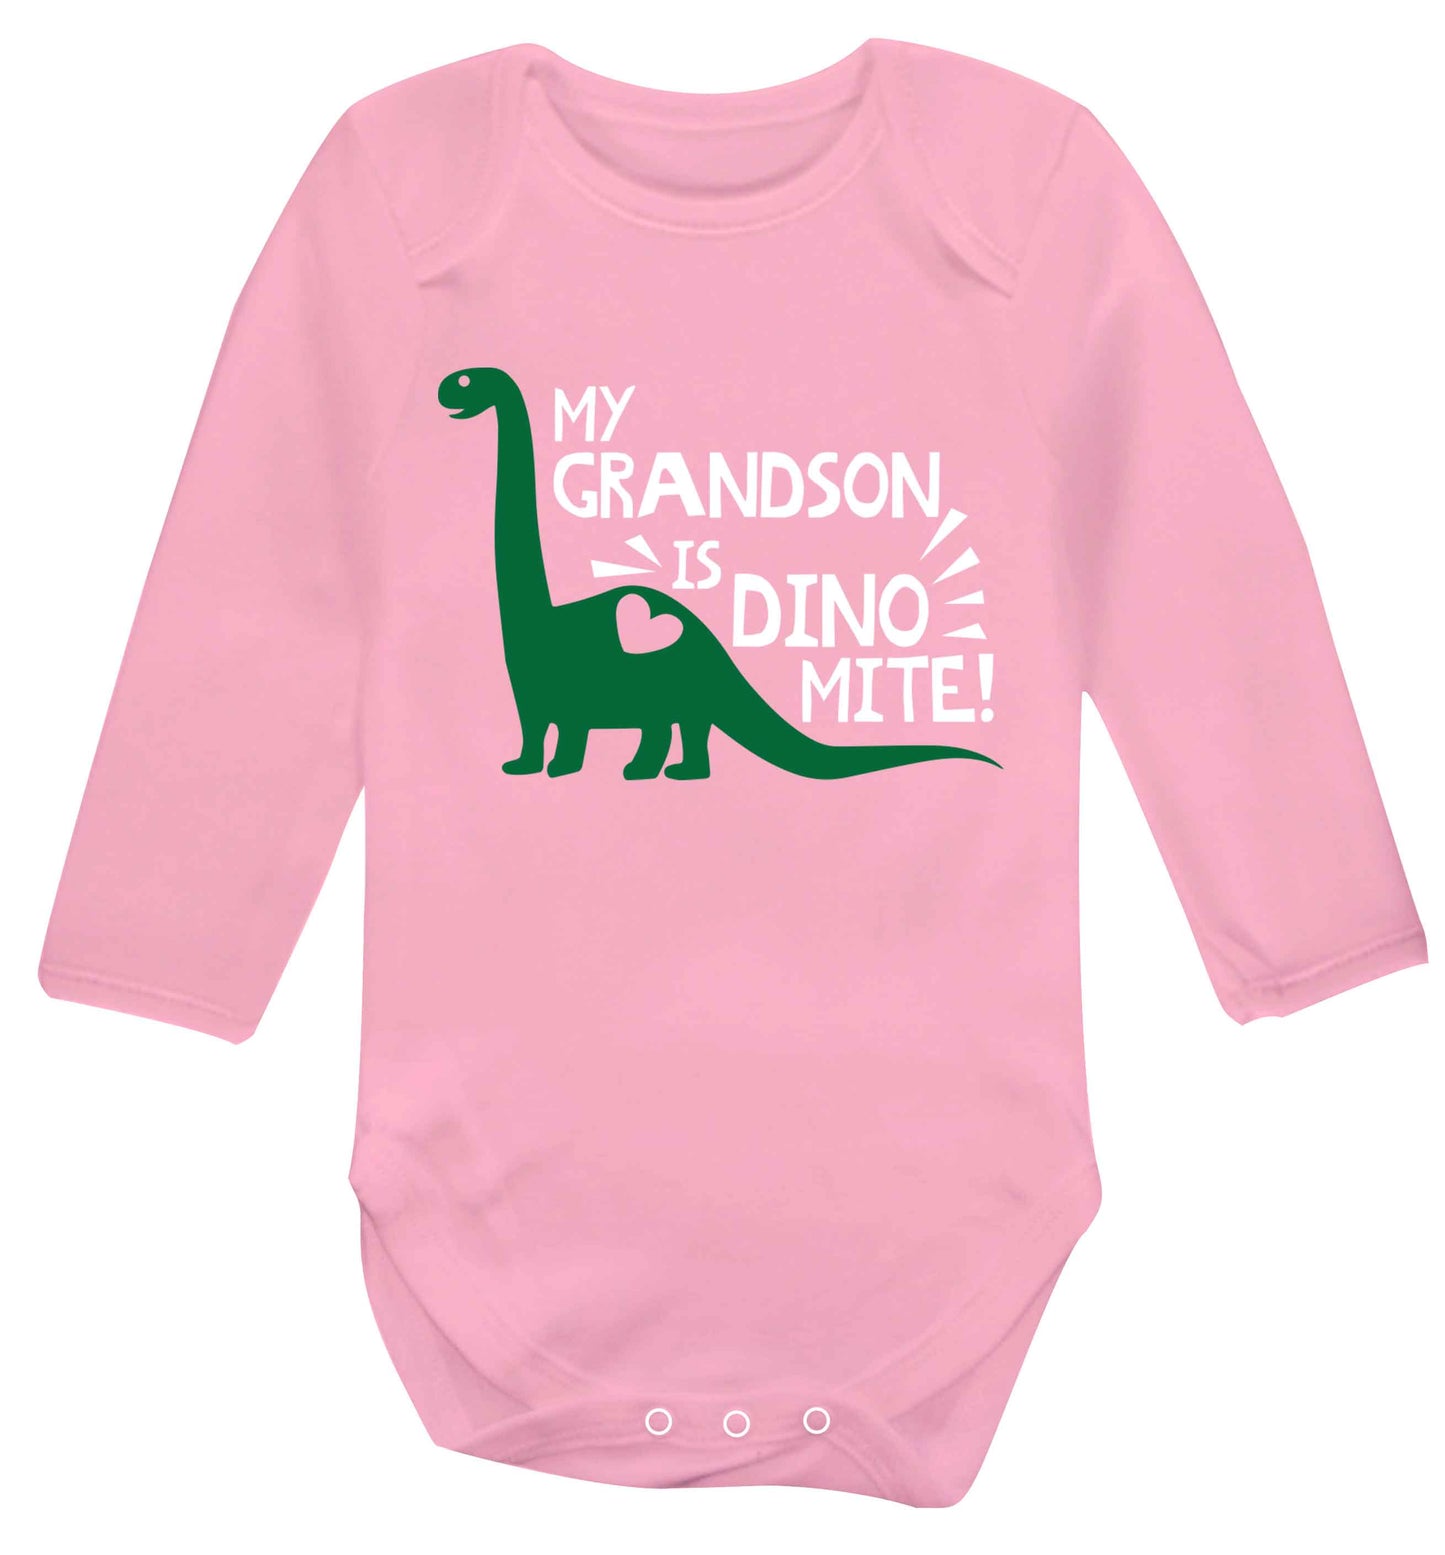 My grandson is dinomite! Baby Vest long sleeved pale pink 6-12 months